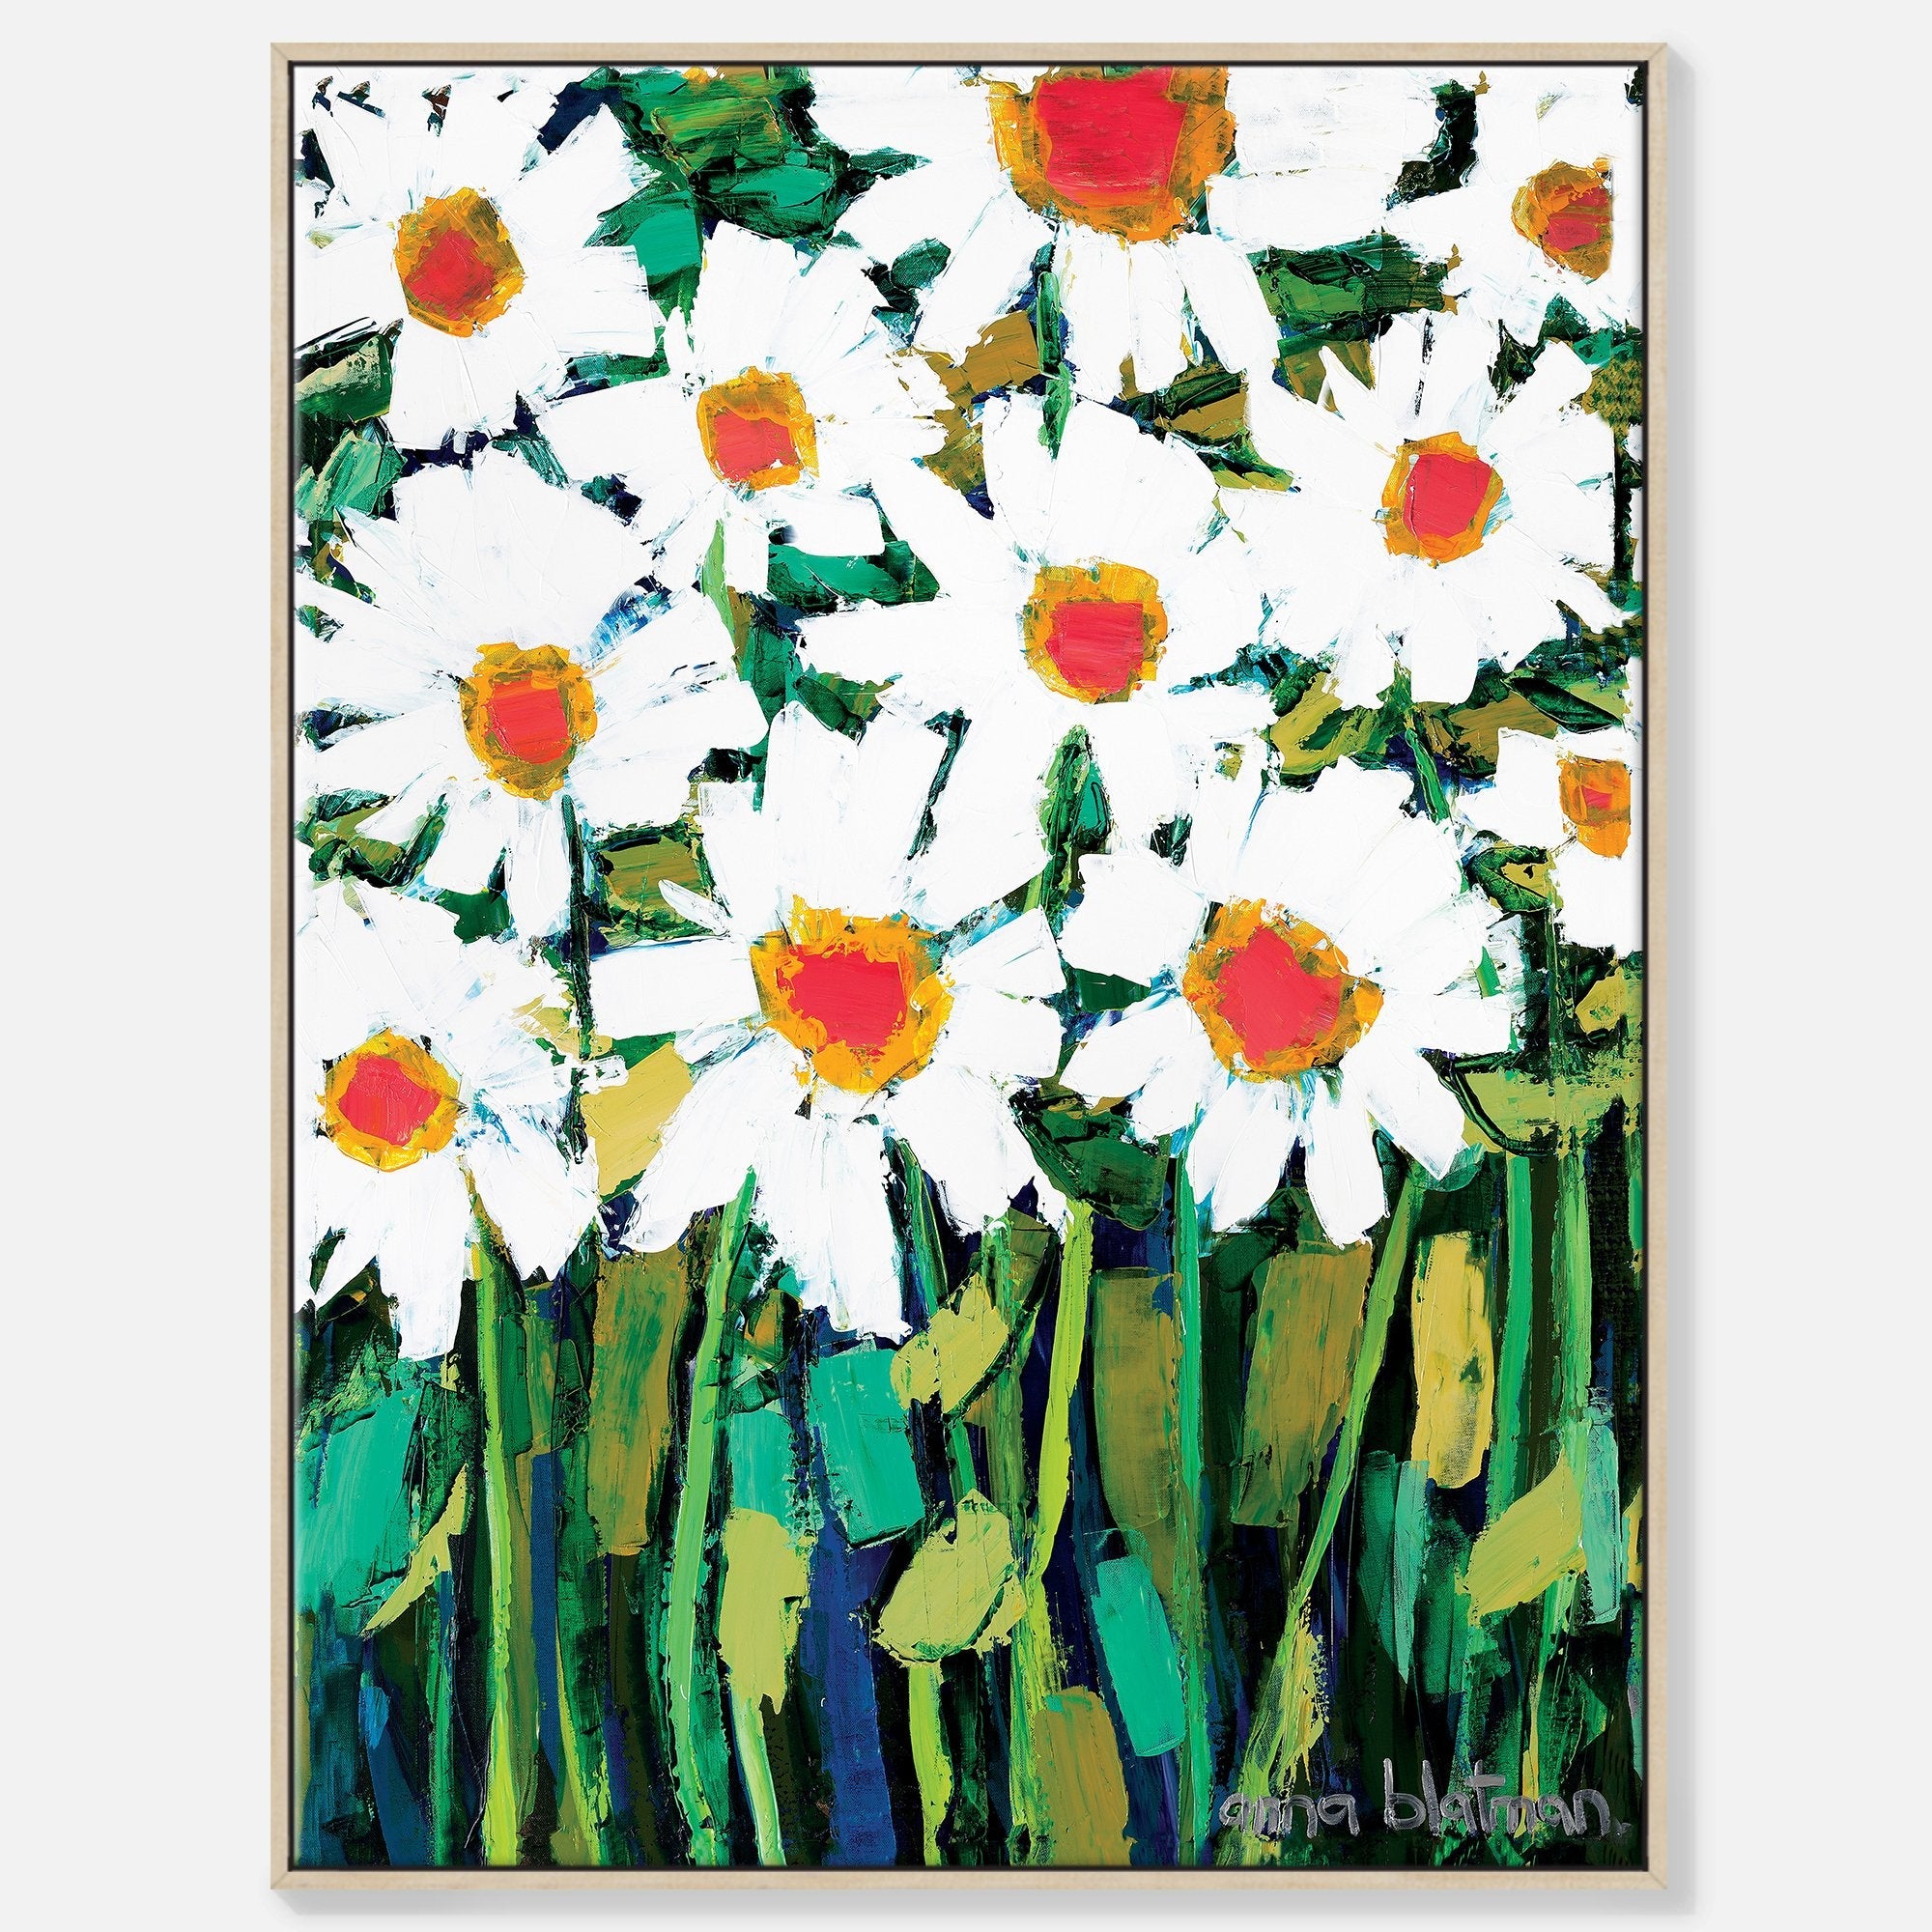 Miriam - Gallery Wrapped Canvas